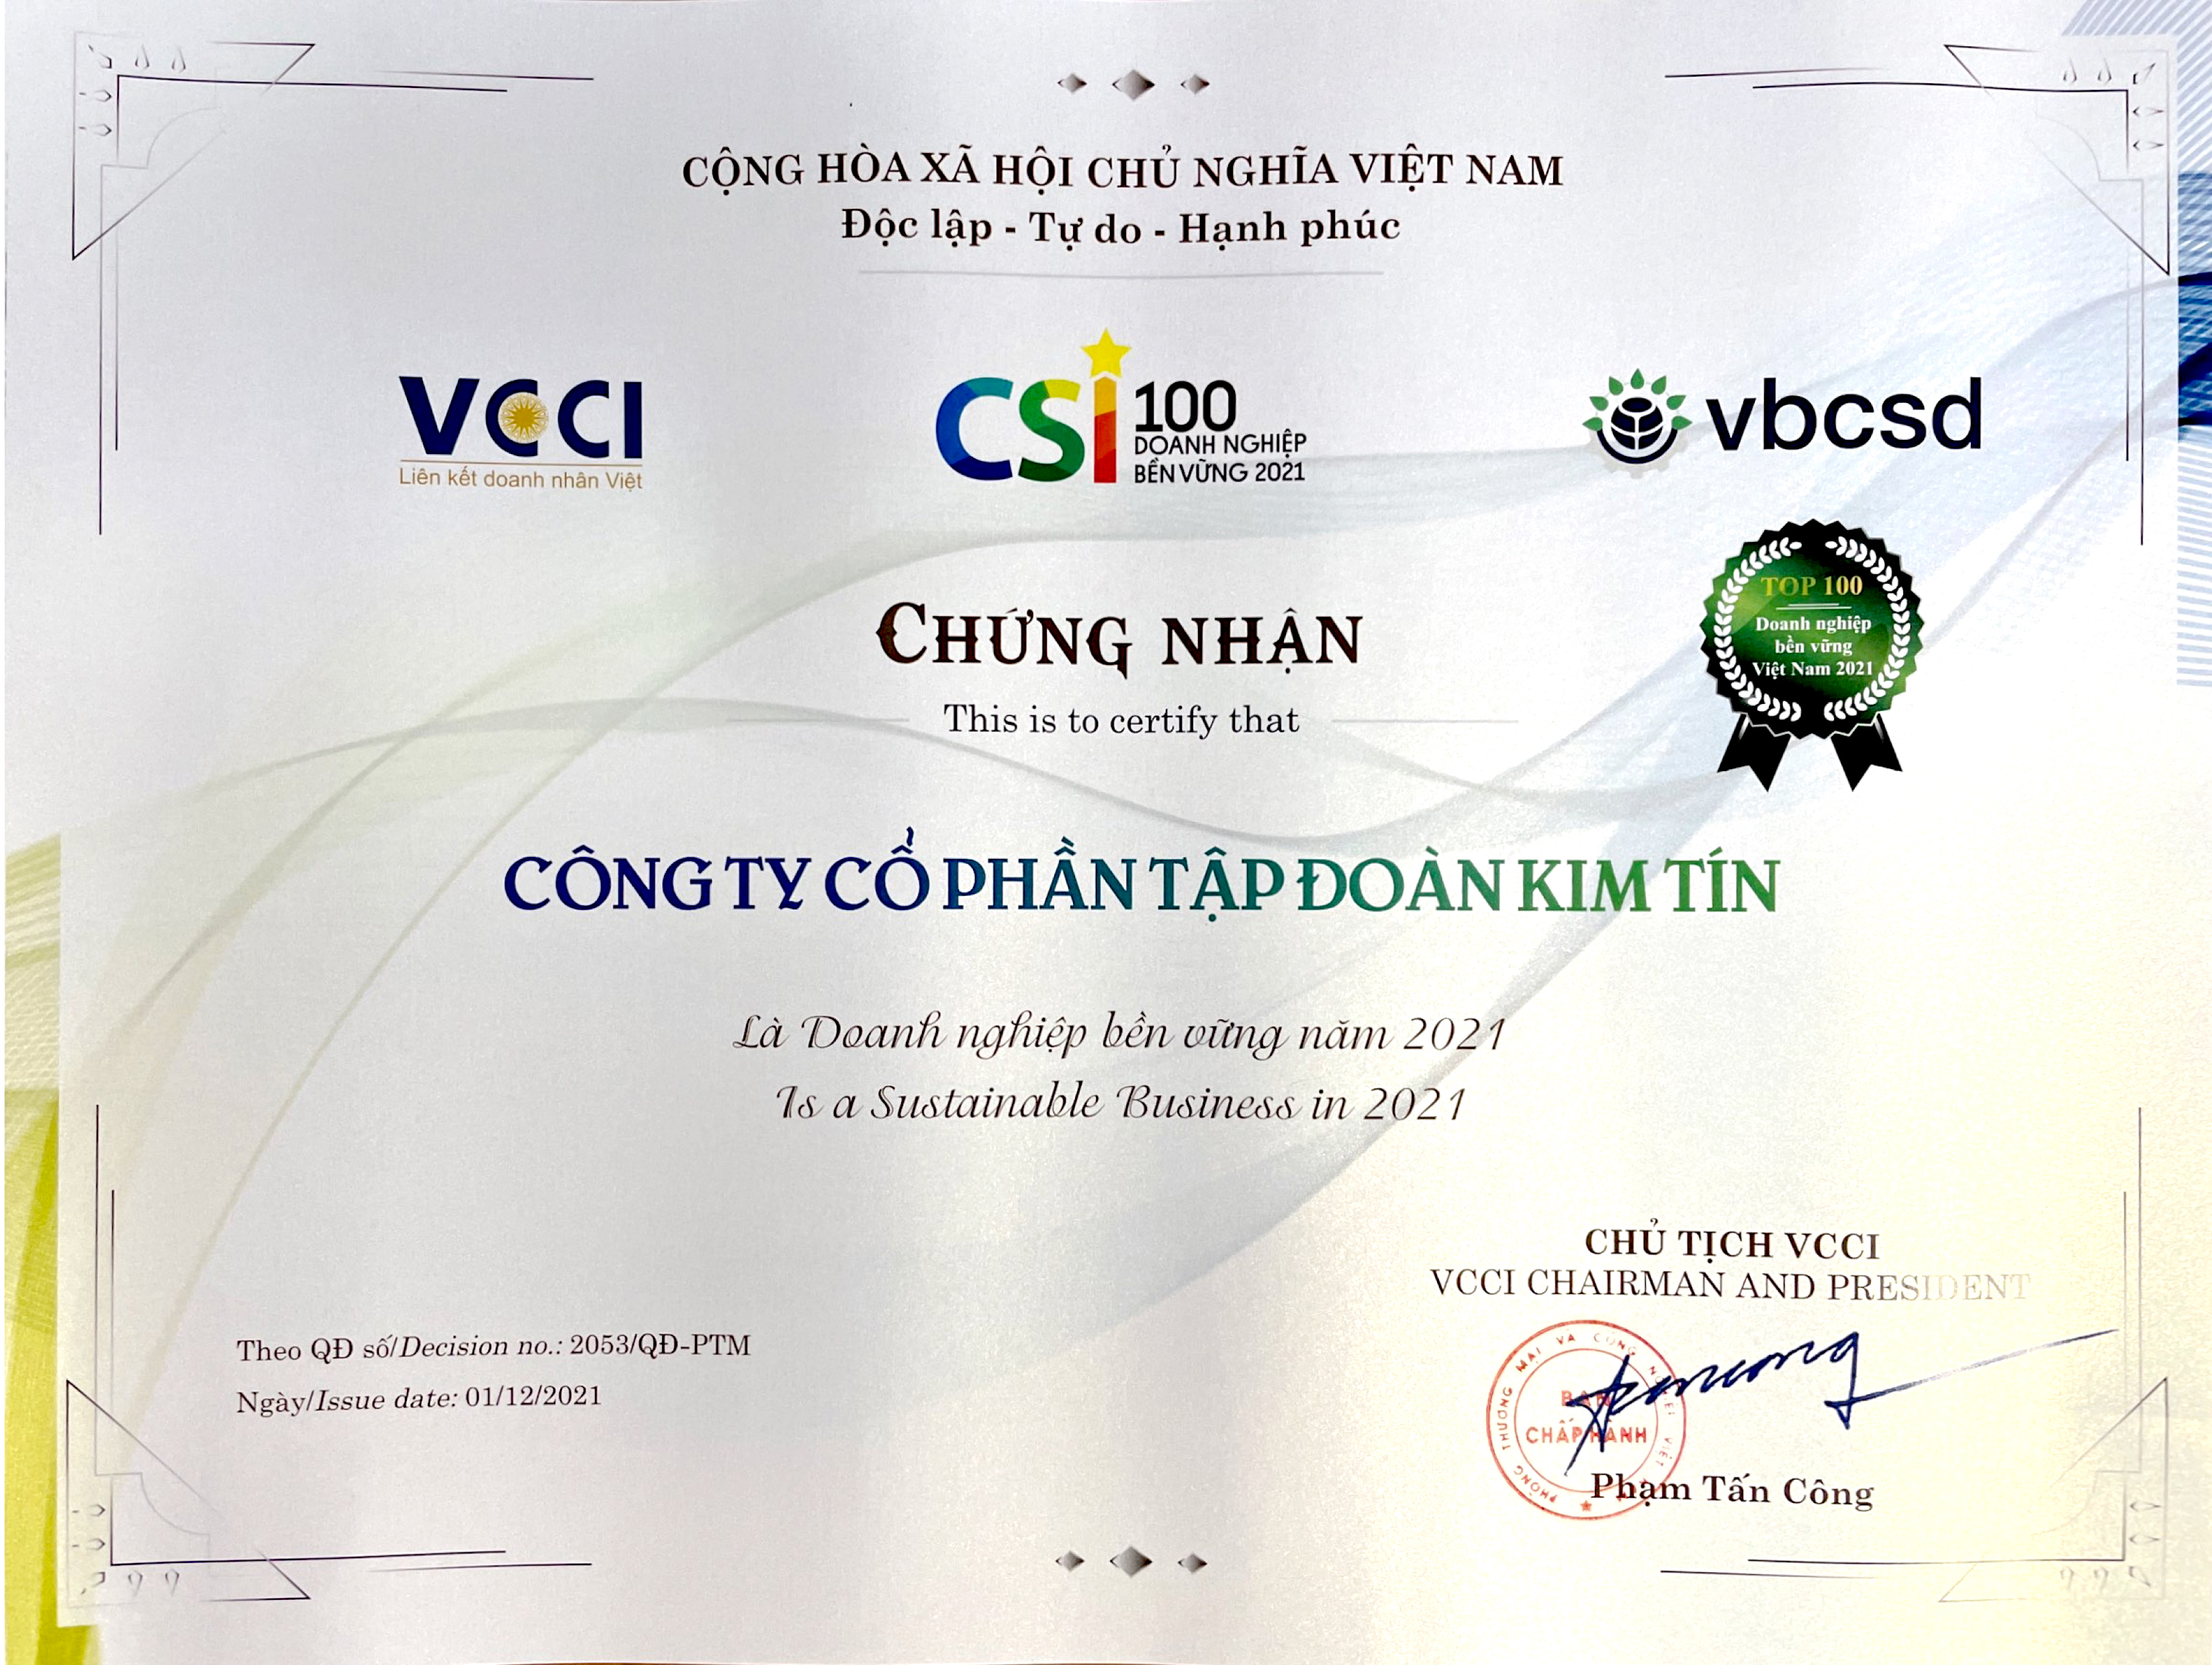 KIM TIN GROUP RECEIVED VIETNAM’S TOP 100 MOST SUSTAINABLE BUSINESSES AWARD IN 2021